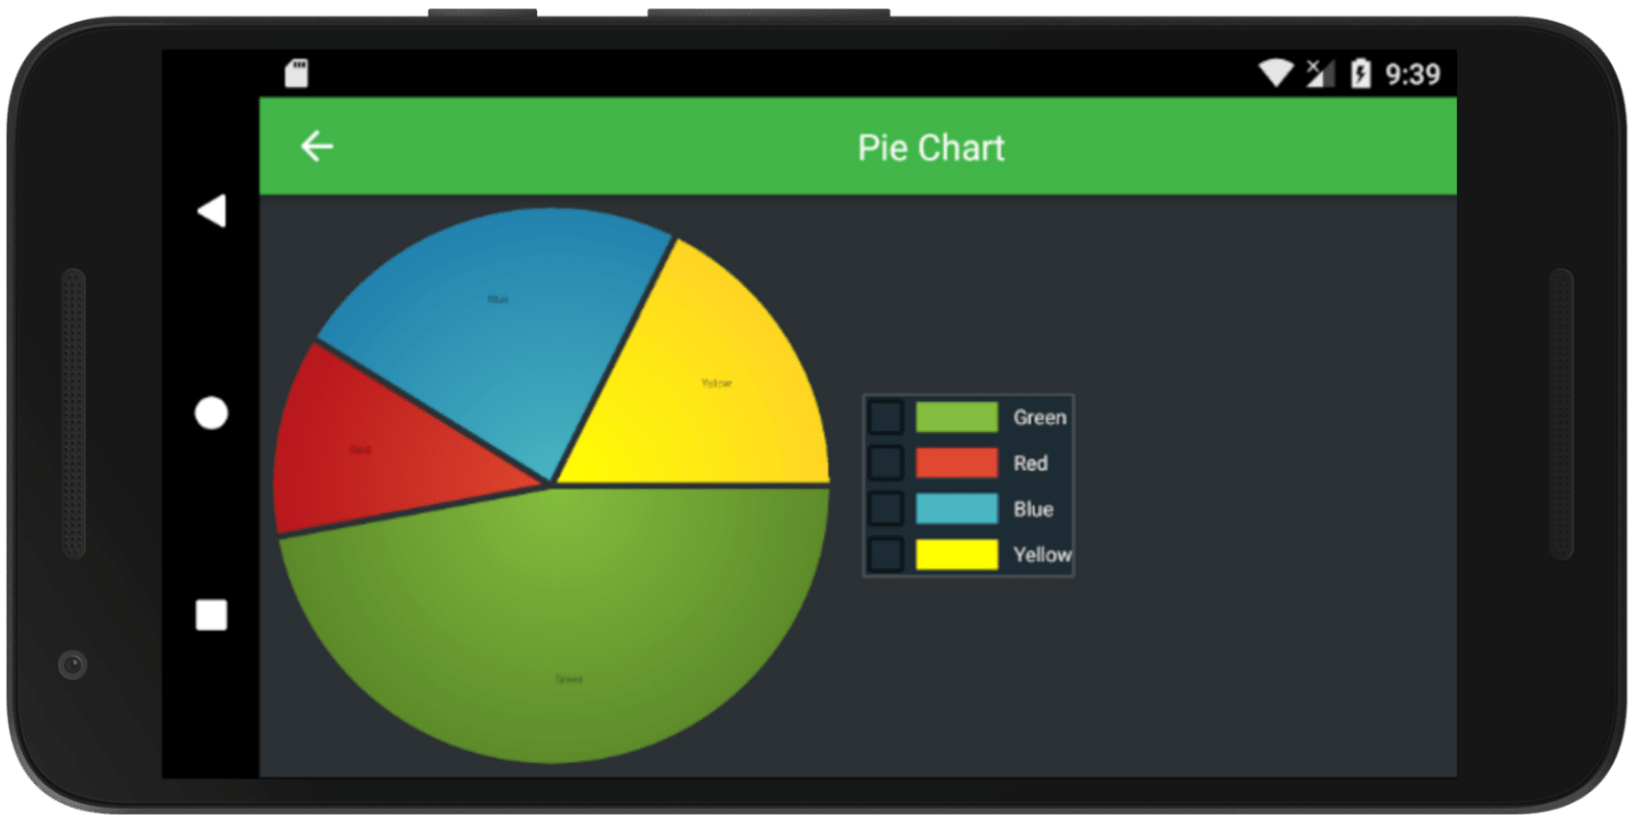 Android Pie Chart Tutorial